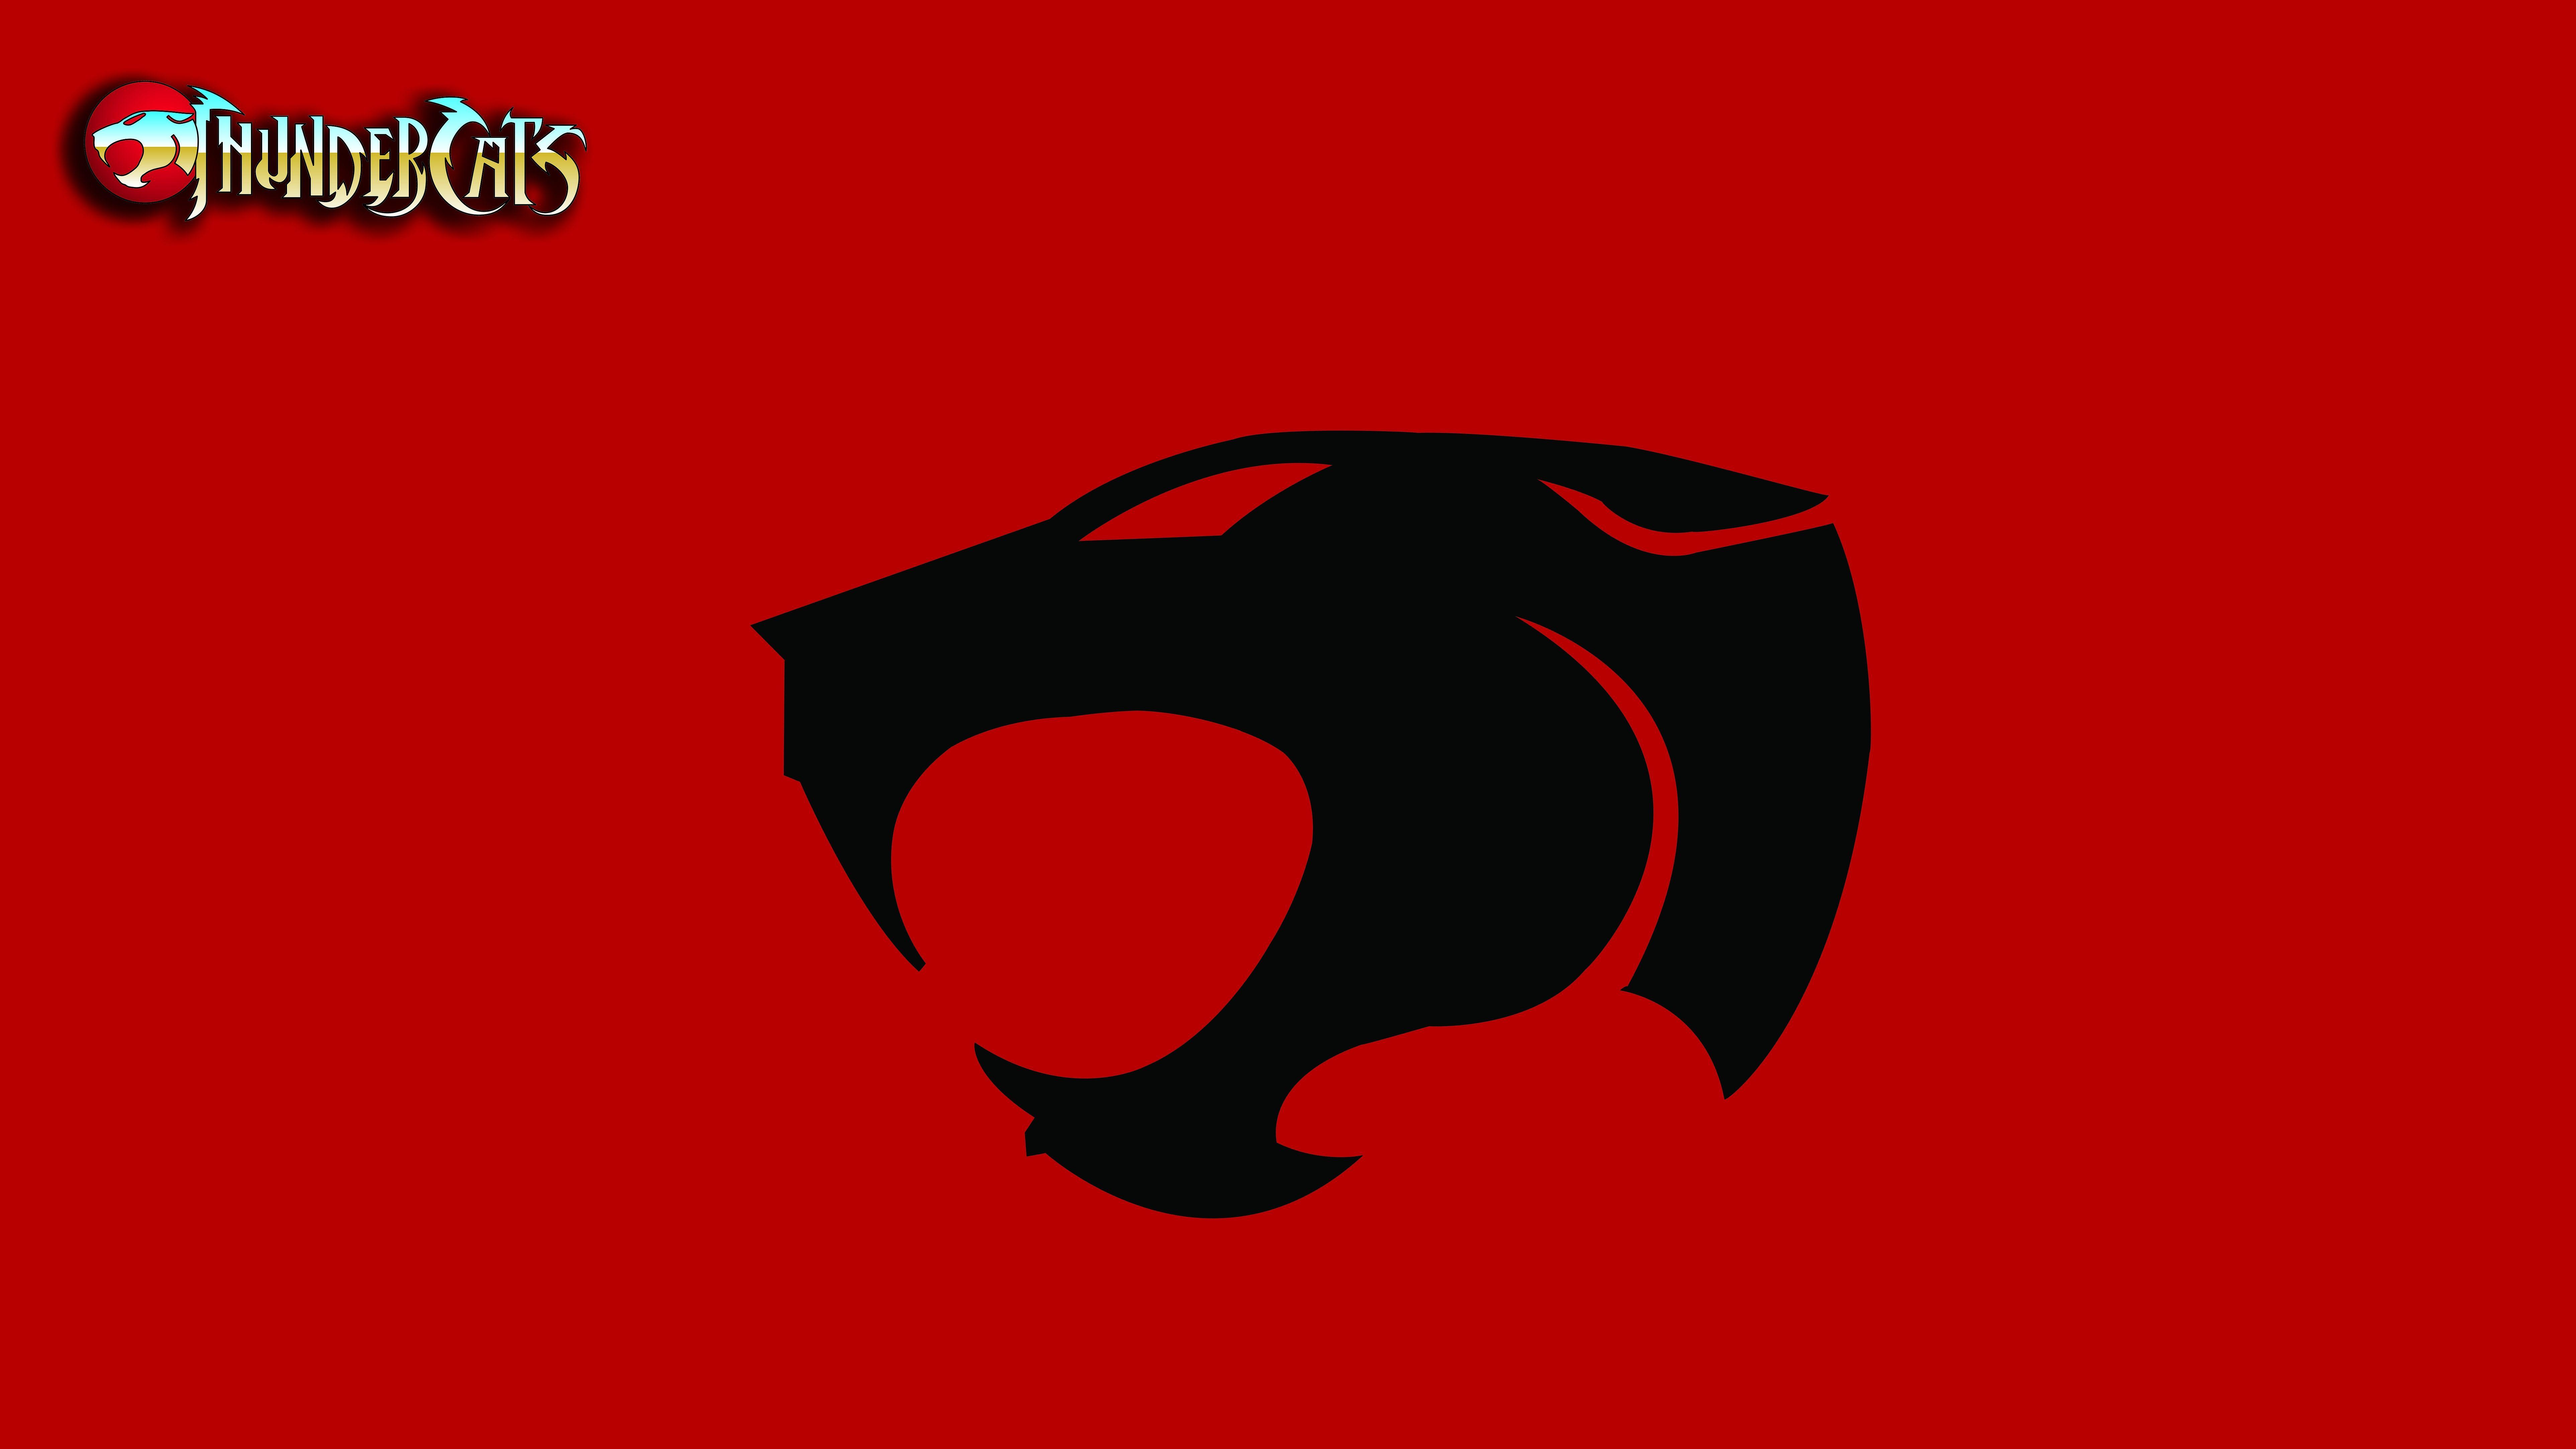 Thundercats 8k Ultra HD Wallpaper and Background Imagex4331